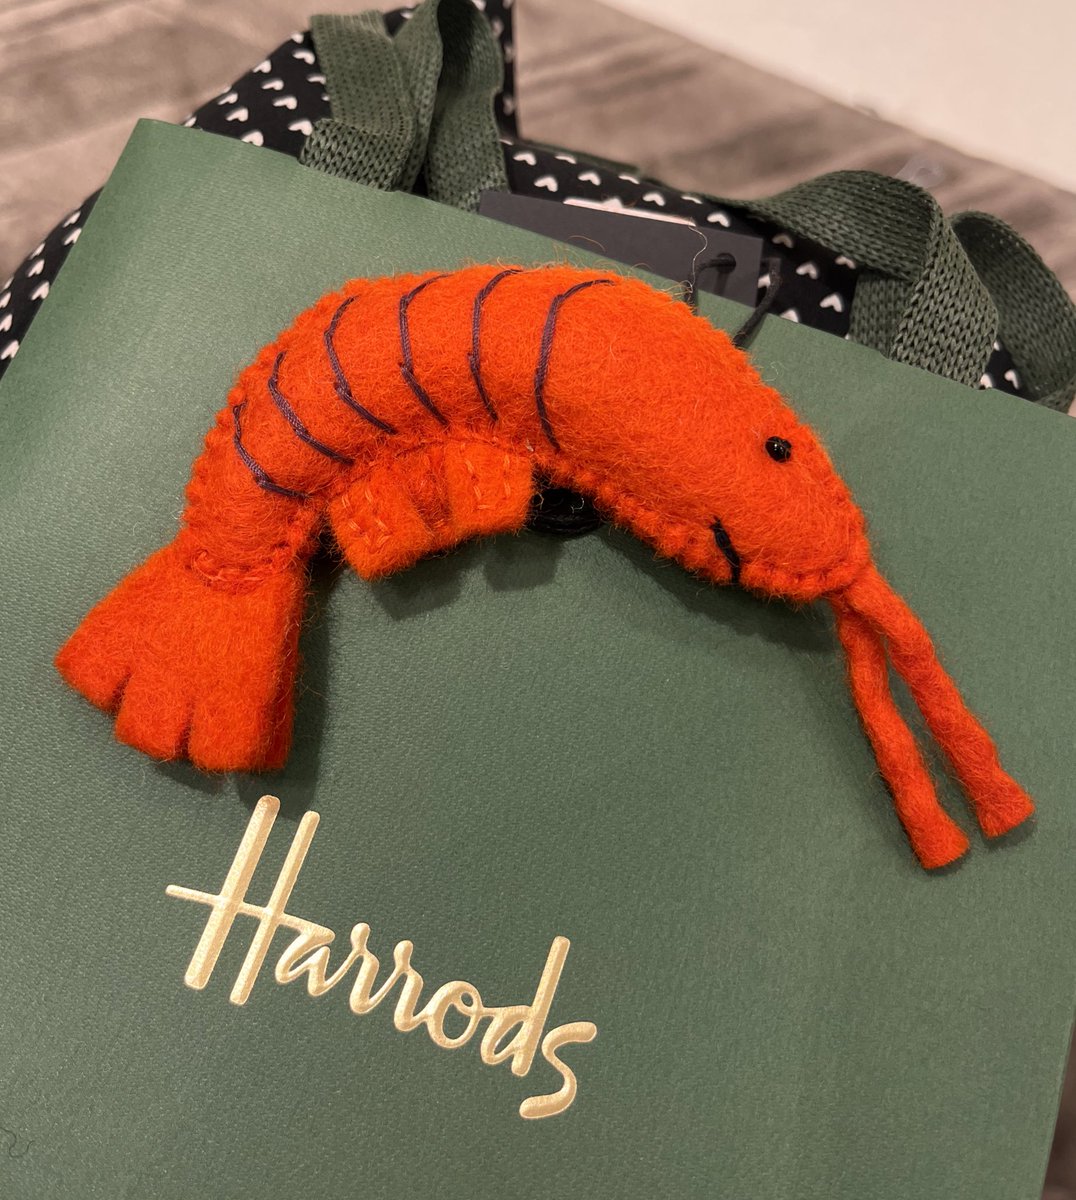 Bought a shrimp at Harrods. This is what that department store is known for right?